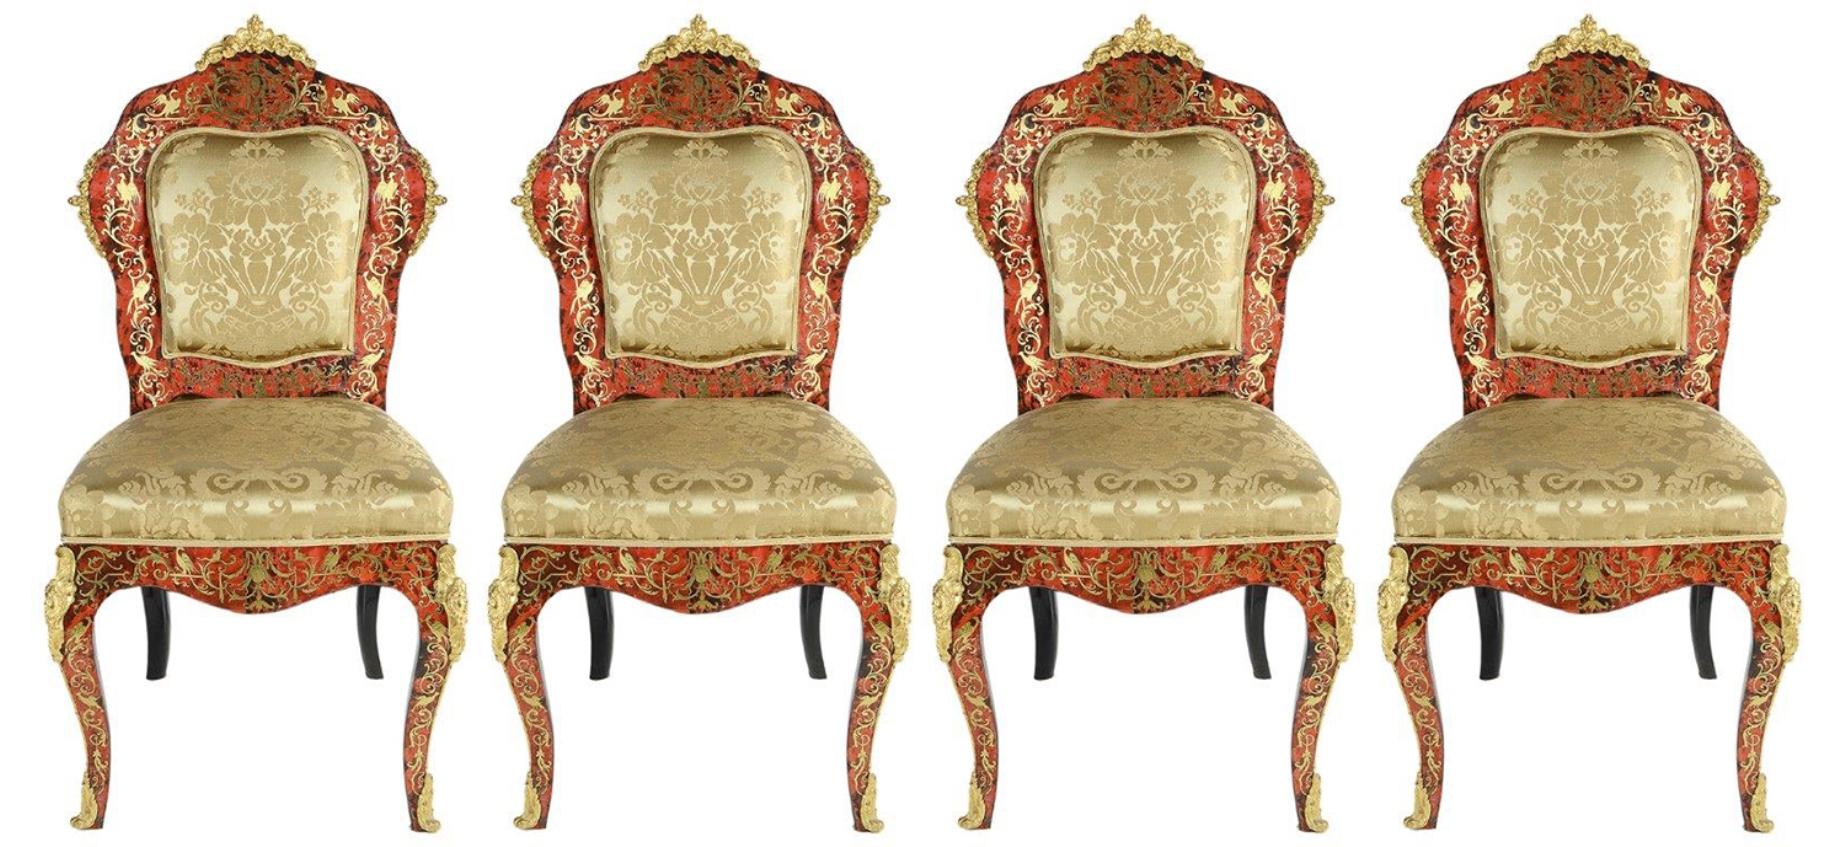 A rare and unusual set of four 19th century French Boulle tortoiseshell and brass inlaid side chairs, each with gilded ormolu mounts, the inlay depicting foliate scrolls and exotic birds. Upholstered back and seats in yellow damask silk. Raised on